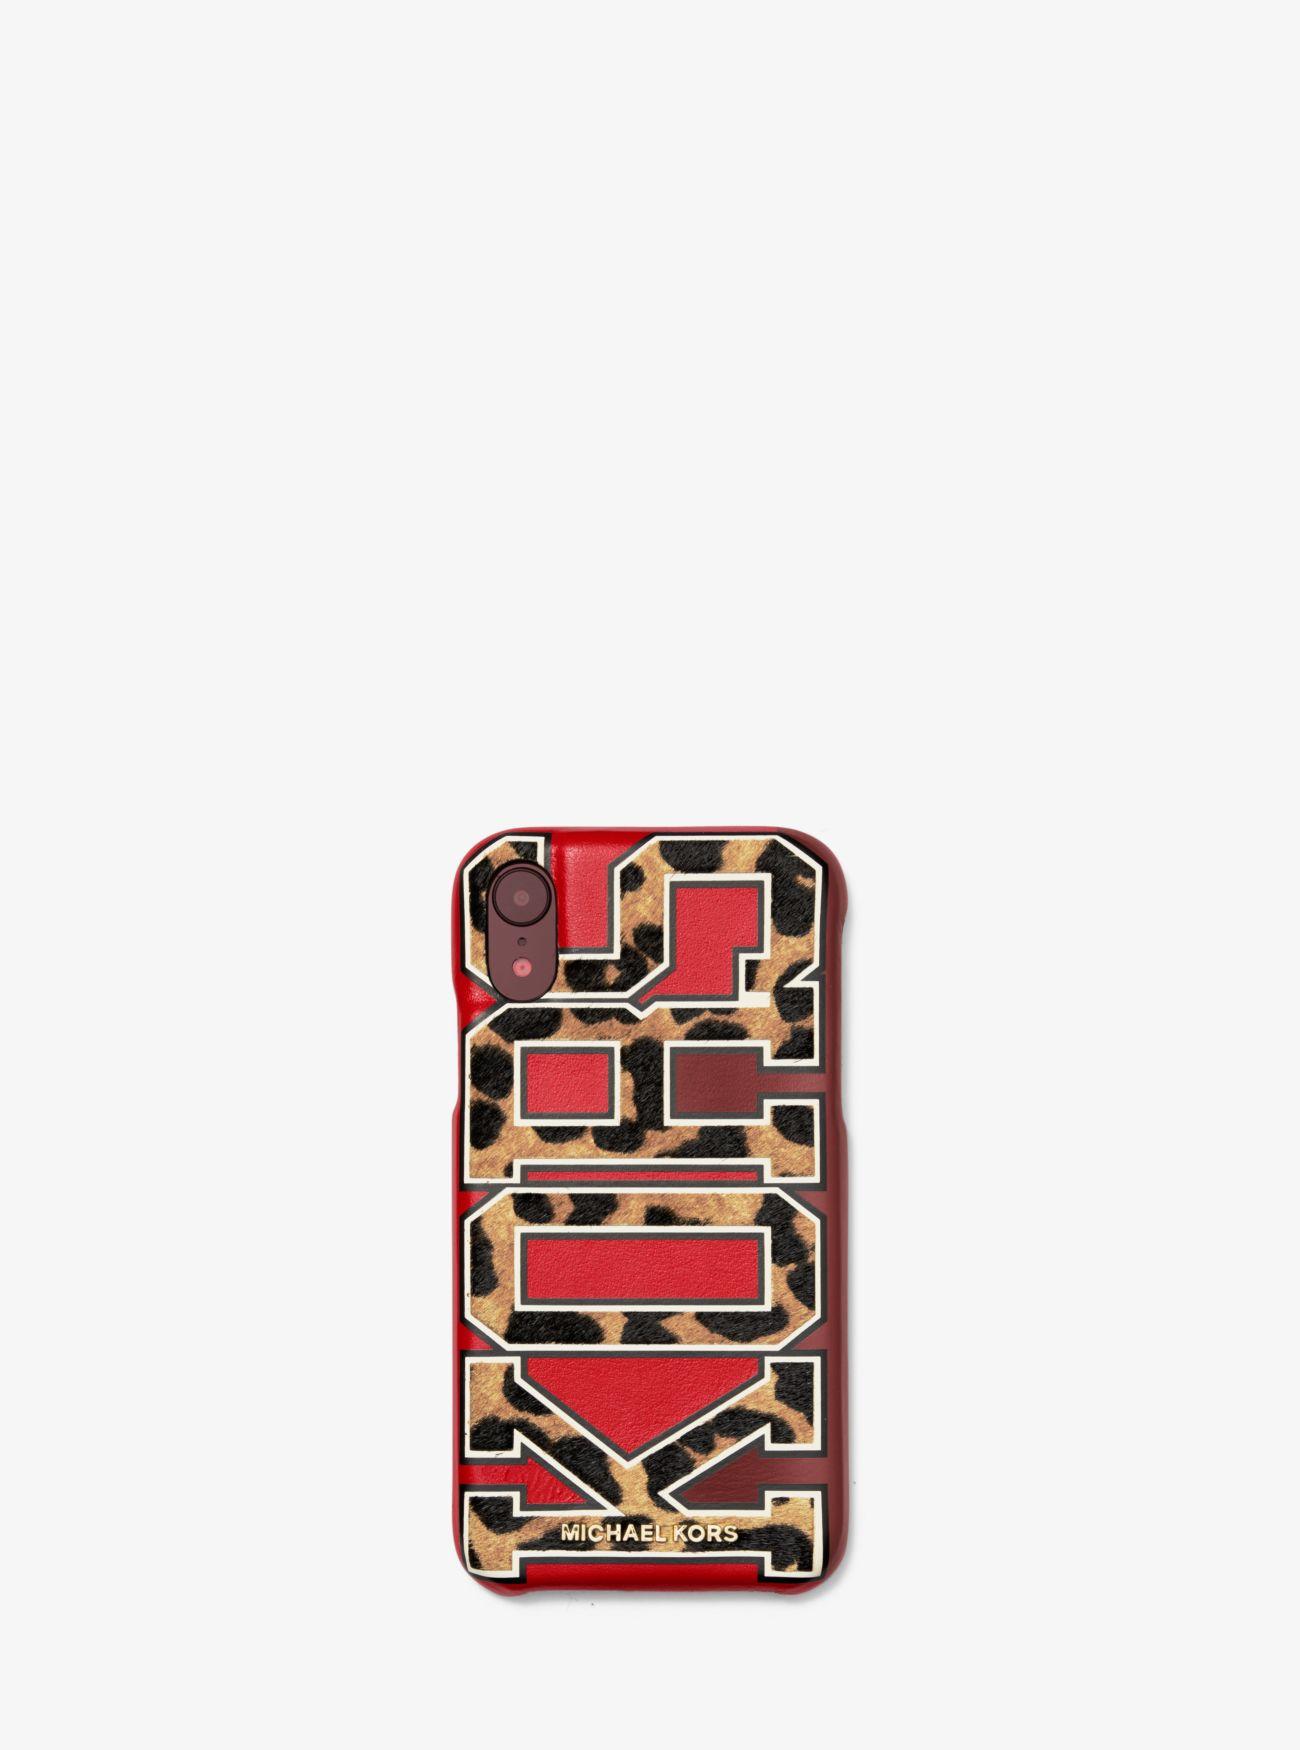 Michael Kors Case For Iphone Xr Luxembourg SAVE 46  neokonceptscom